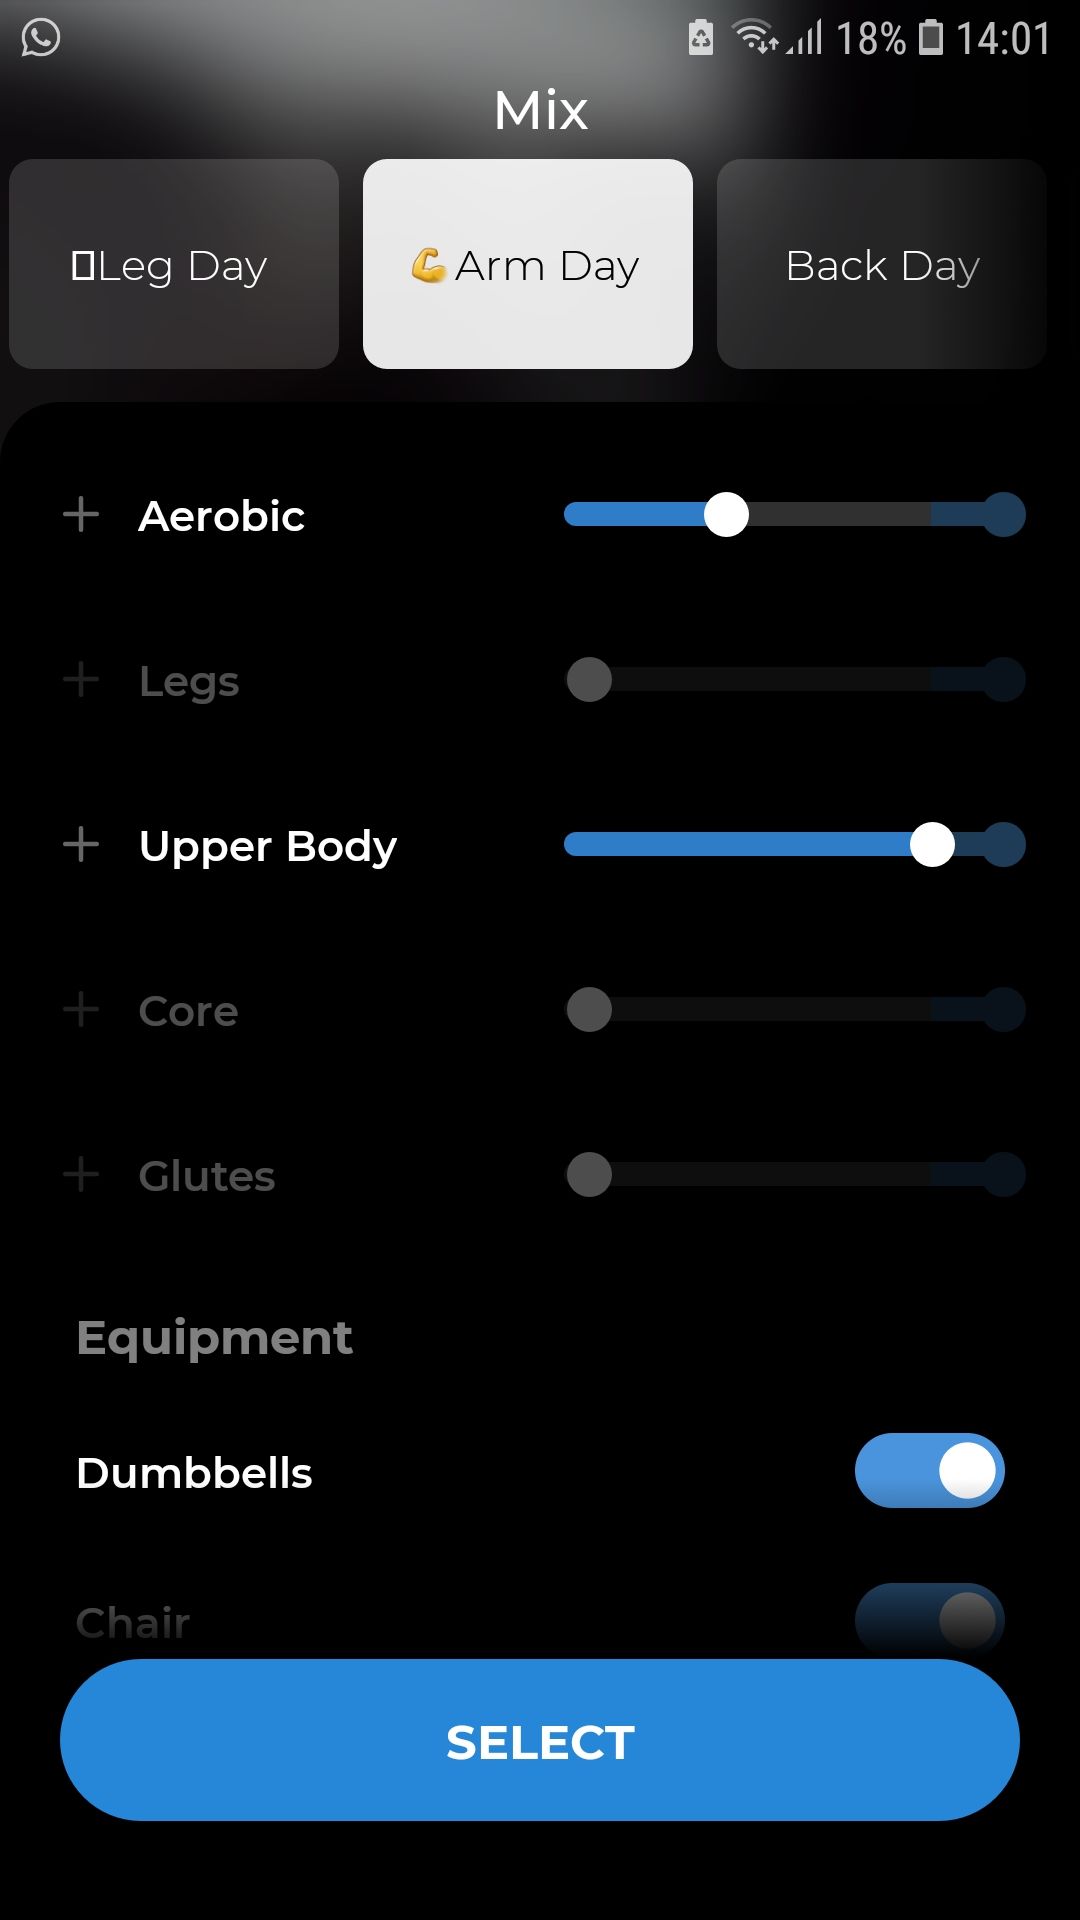 Down Dog HIIT mix mobile workout app